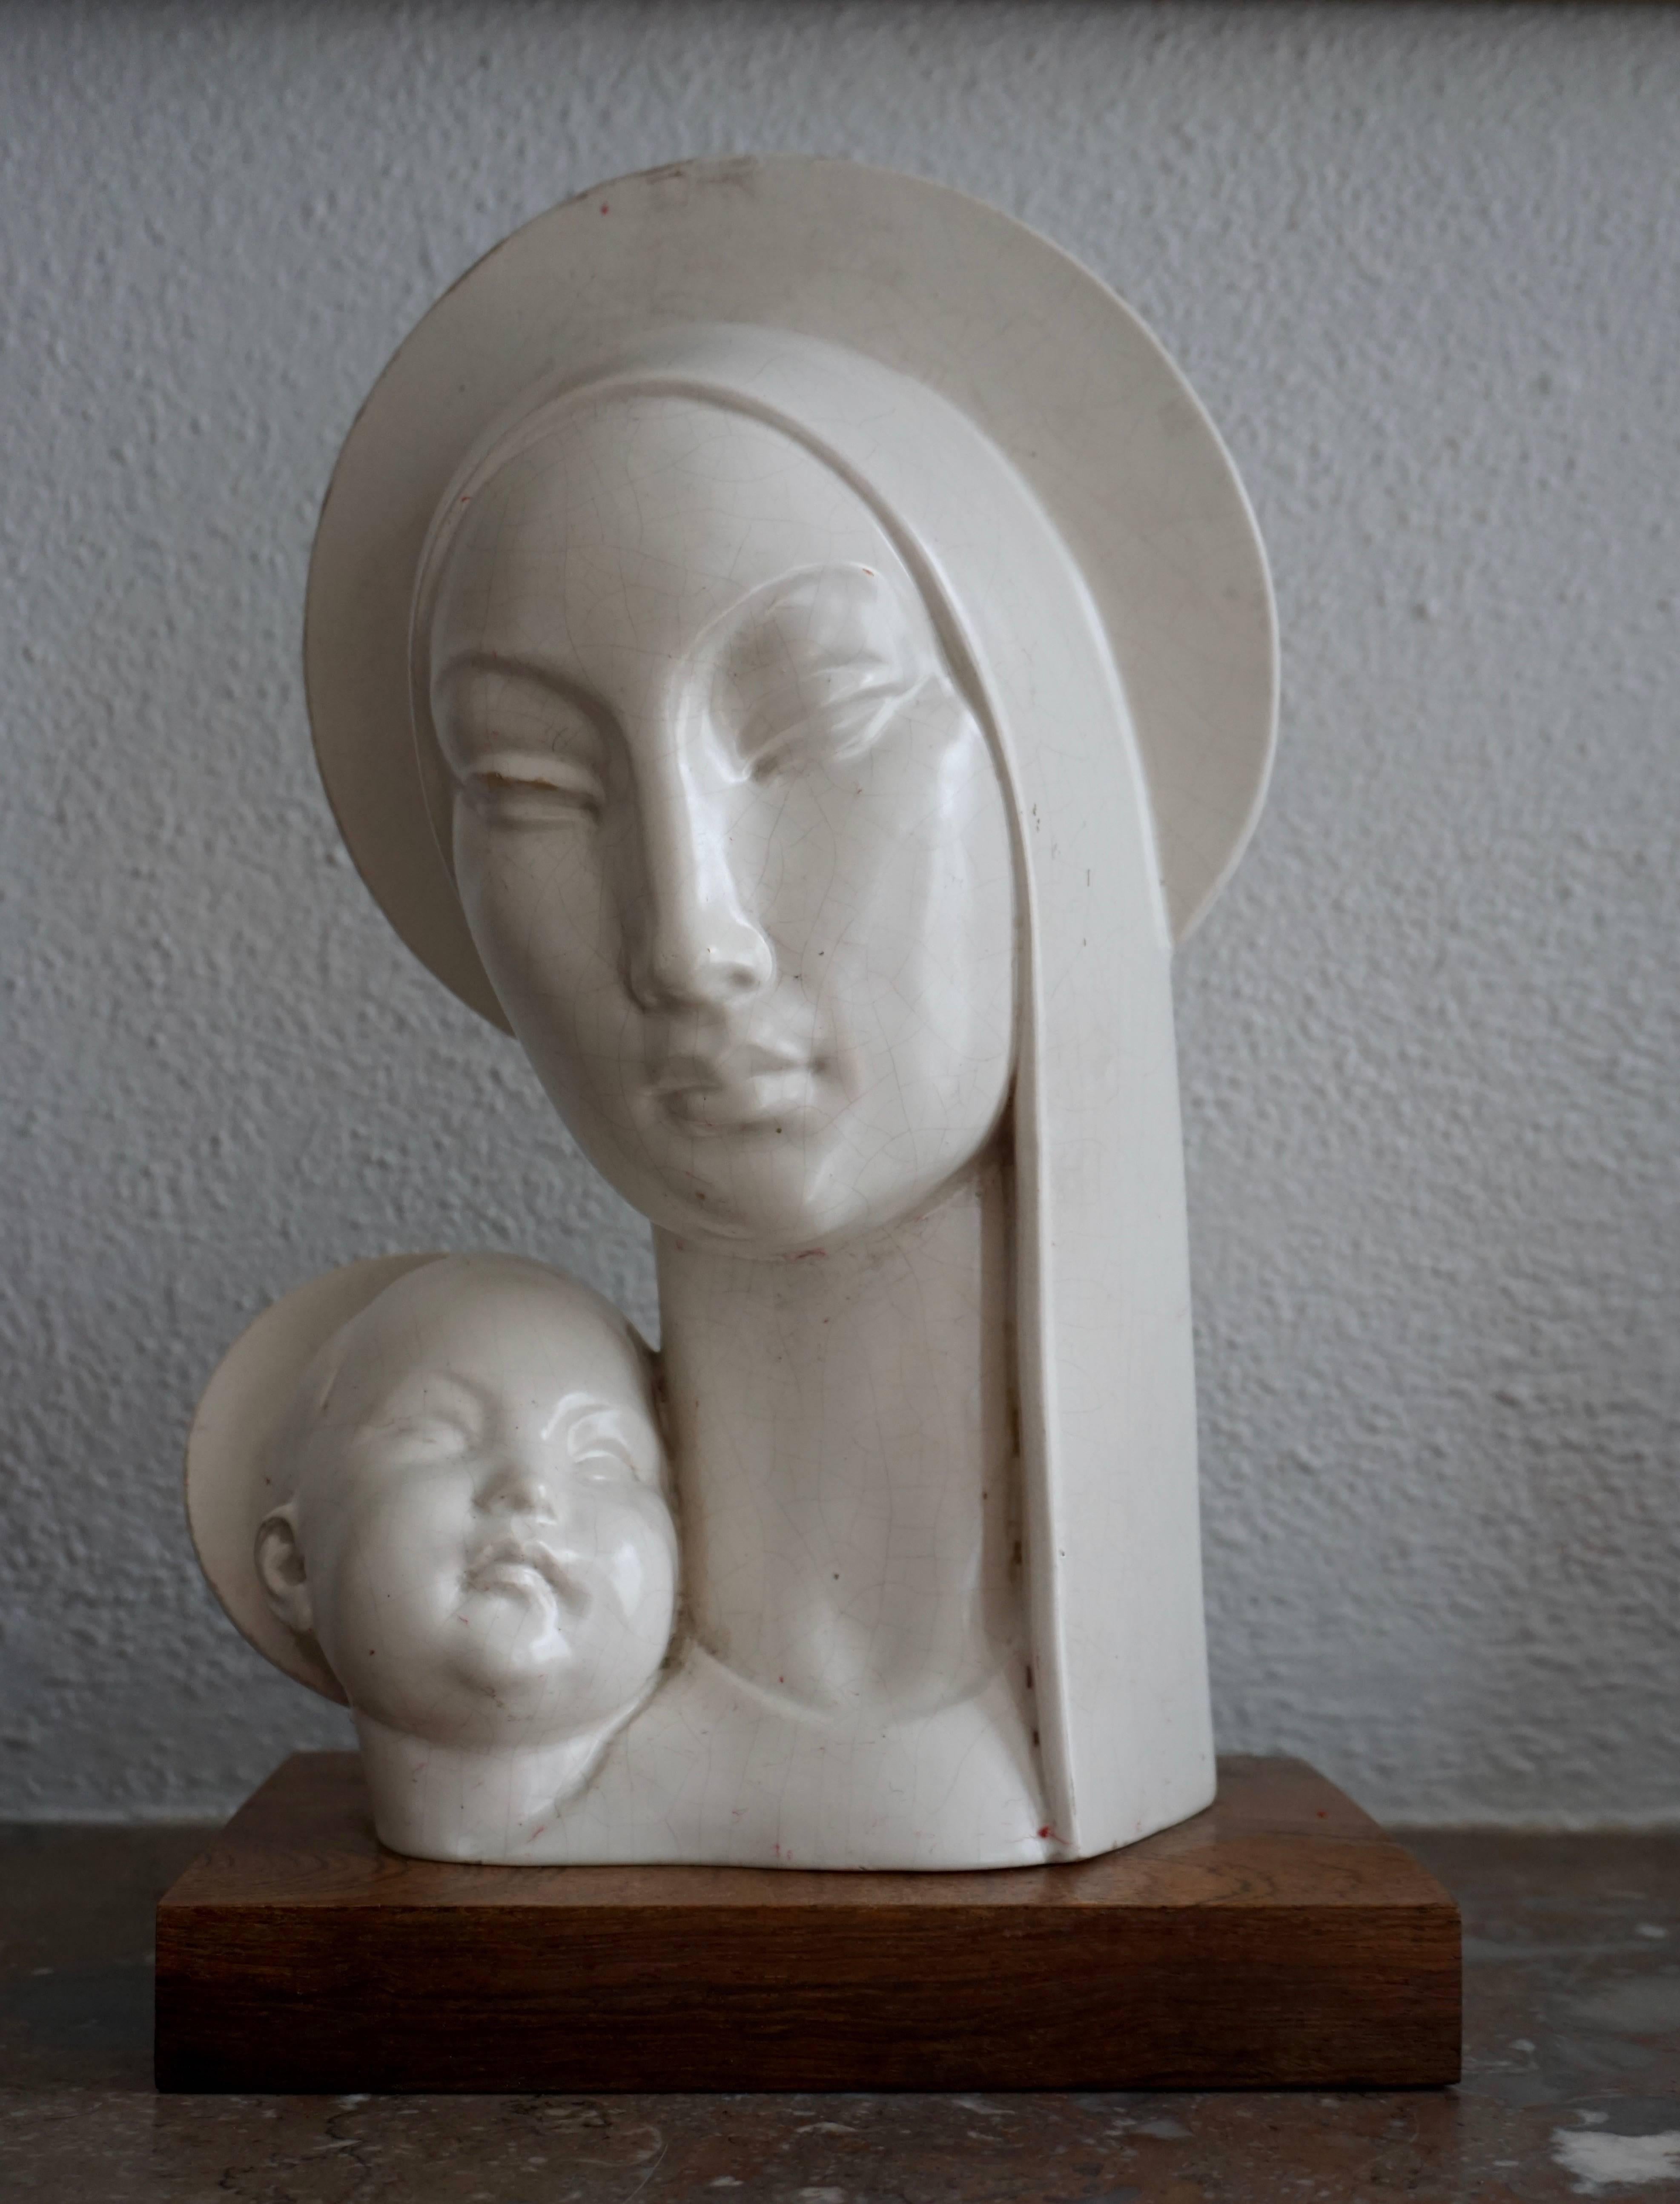 Mid-20th century stylized plaster buste of Madonna and Child.
Measures: Height 34 cm.